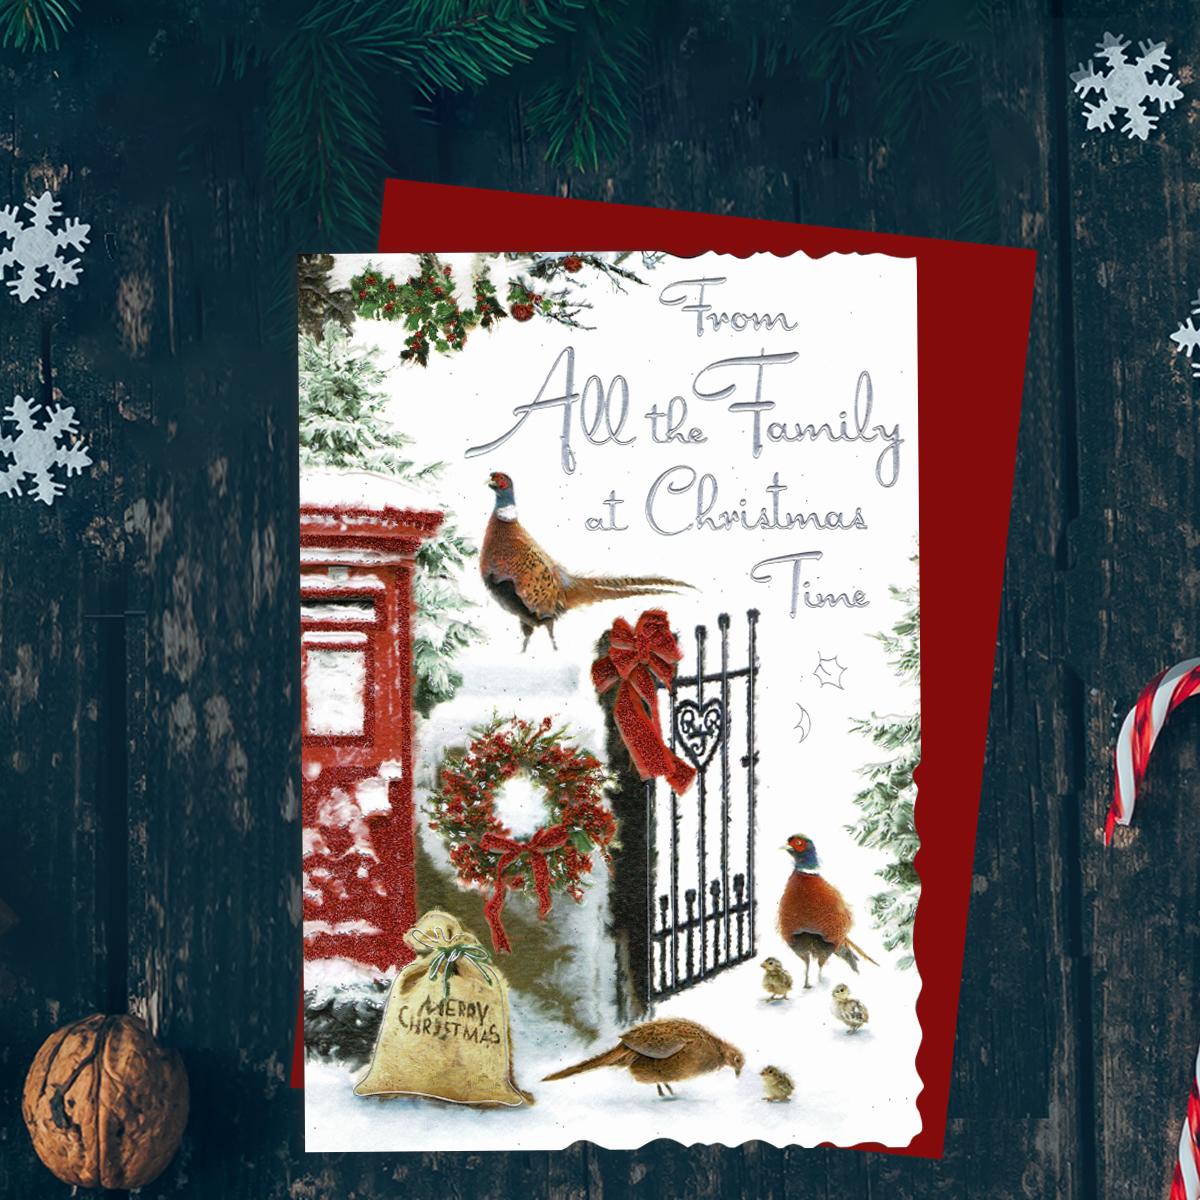 From All The Family At Christmas Time Featuring A Snowy Country Scene! Finished With Silver Foiled Lettering, Red Glitter Details, Red Envelope And Printed Insert